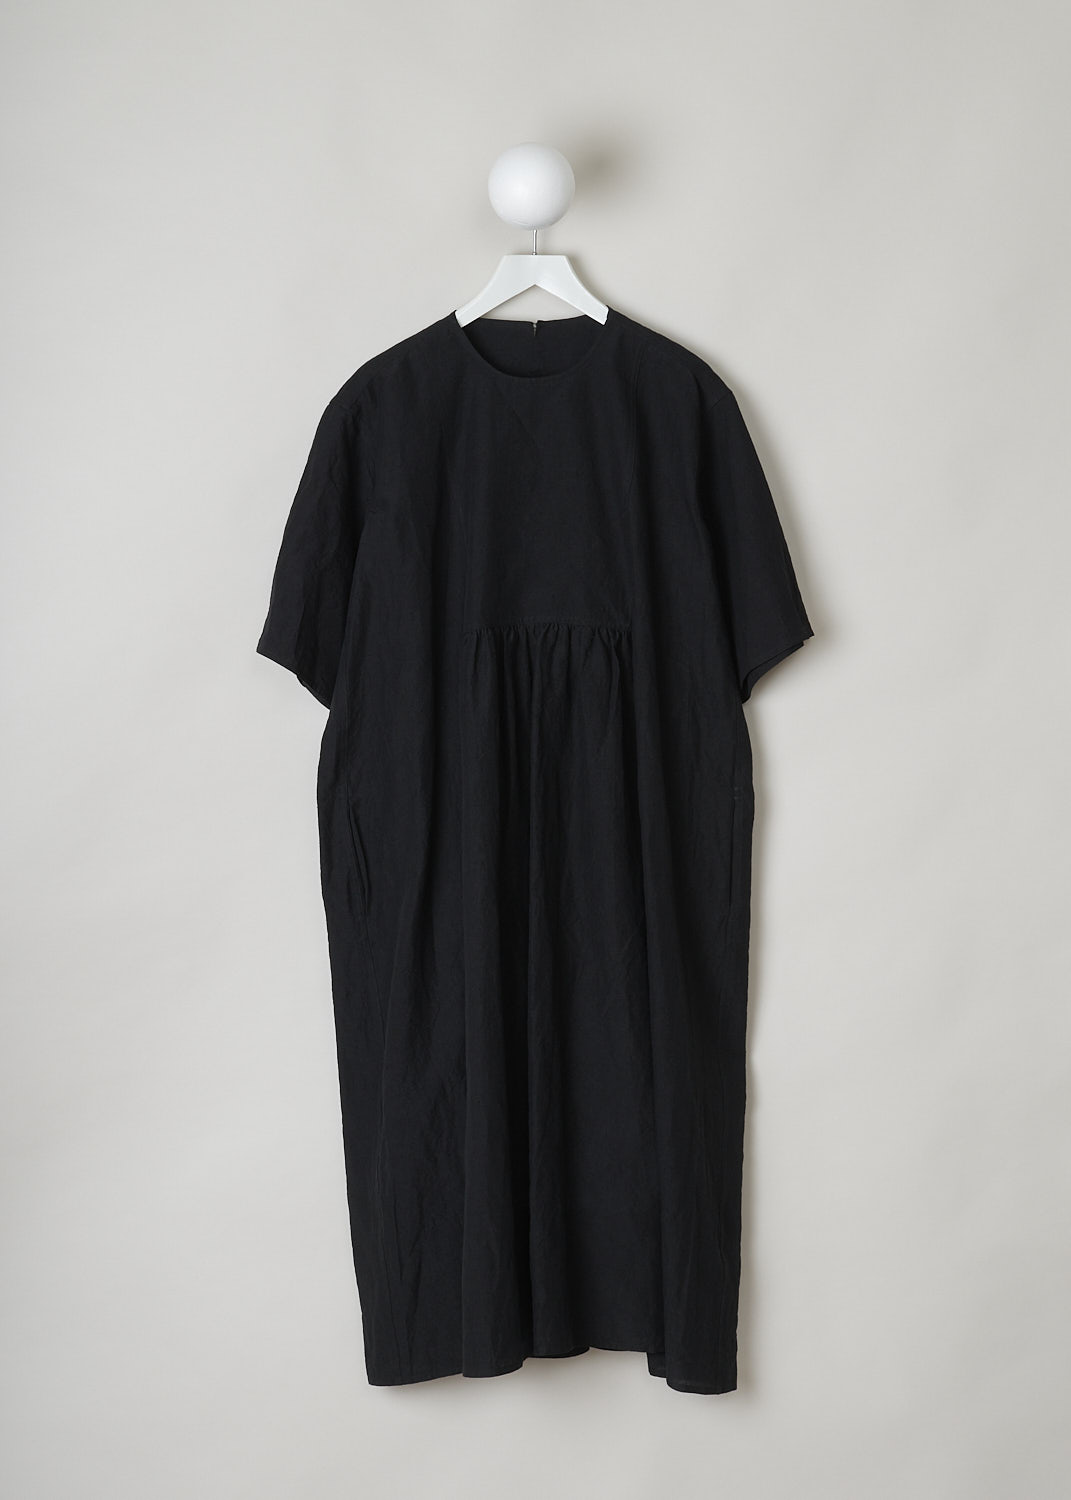 SOFIE Dâ€™HOORE, BLACK LINEN DARNELLE DRESS, DARNELLE_LIFE_BLACK, Black, Front, This oversized black midi dress features a round neckline, dropped shoulders and short sleeves. The A-line dress has a square bib-like front with pleated details below. Concealed in the side seams, slanted pockets can be found. The dress has a straight hemline with slits on either side. 

